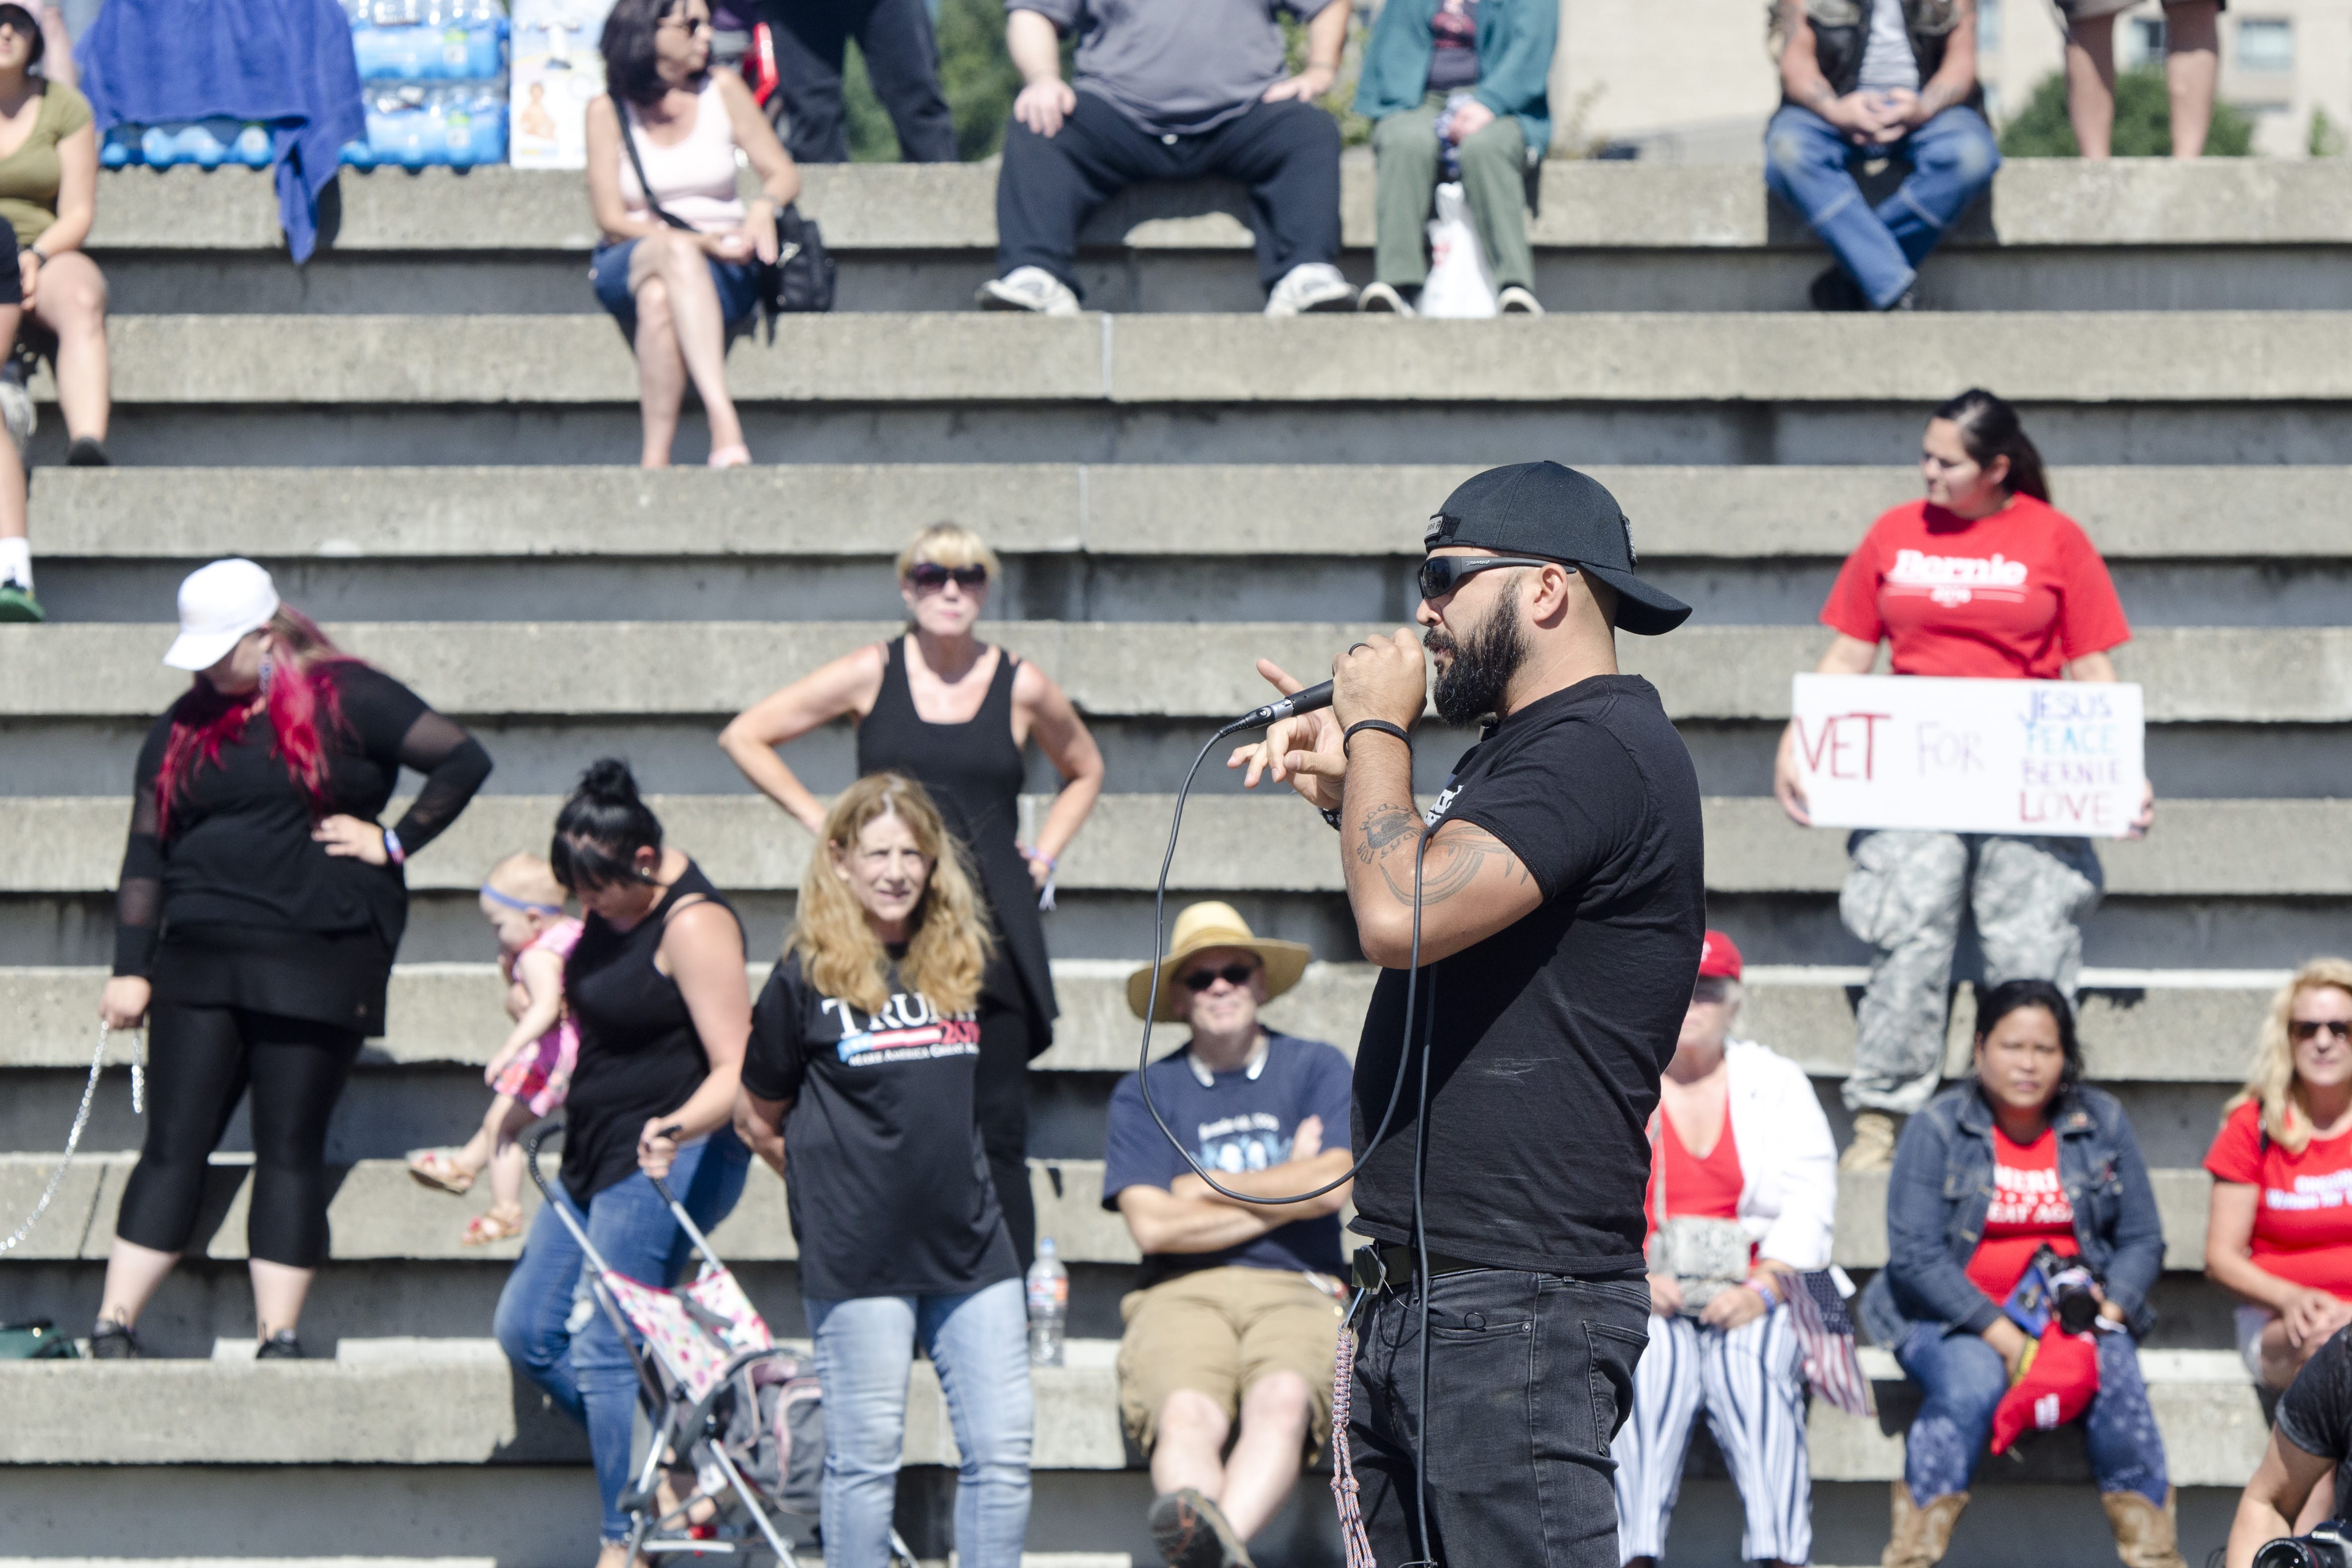 Joey Gibson speaks at a rally held by his Patriot Prayer Group at the Port of Vancouver Amphitheater in September 2017. The event was moved to Vancouver from Portland in an attempt to avoid protesters.